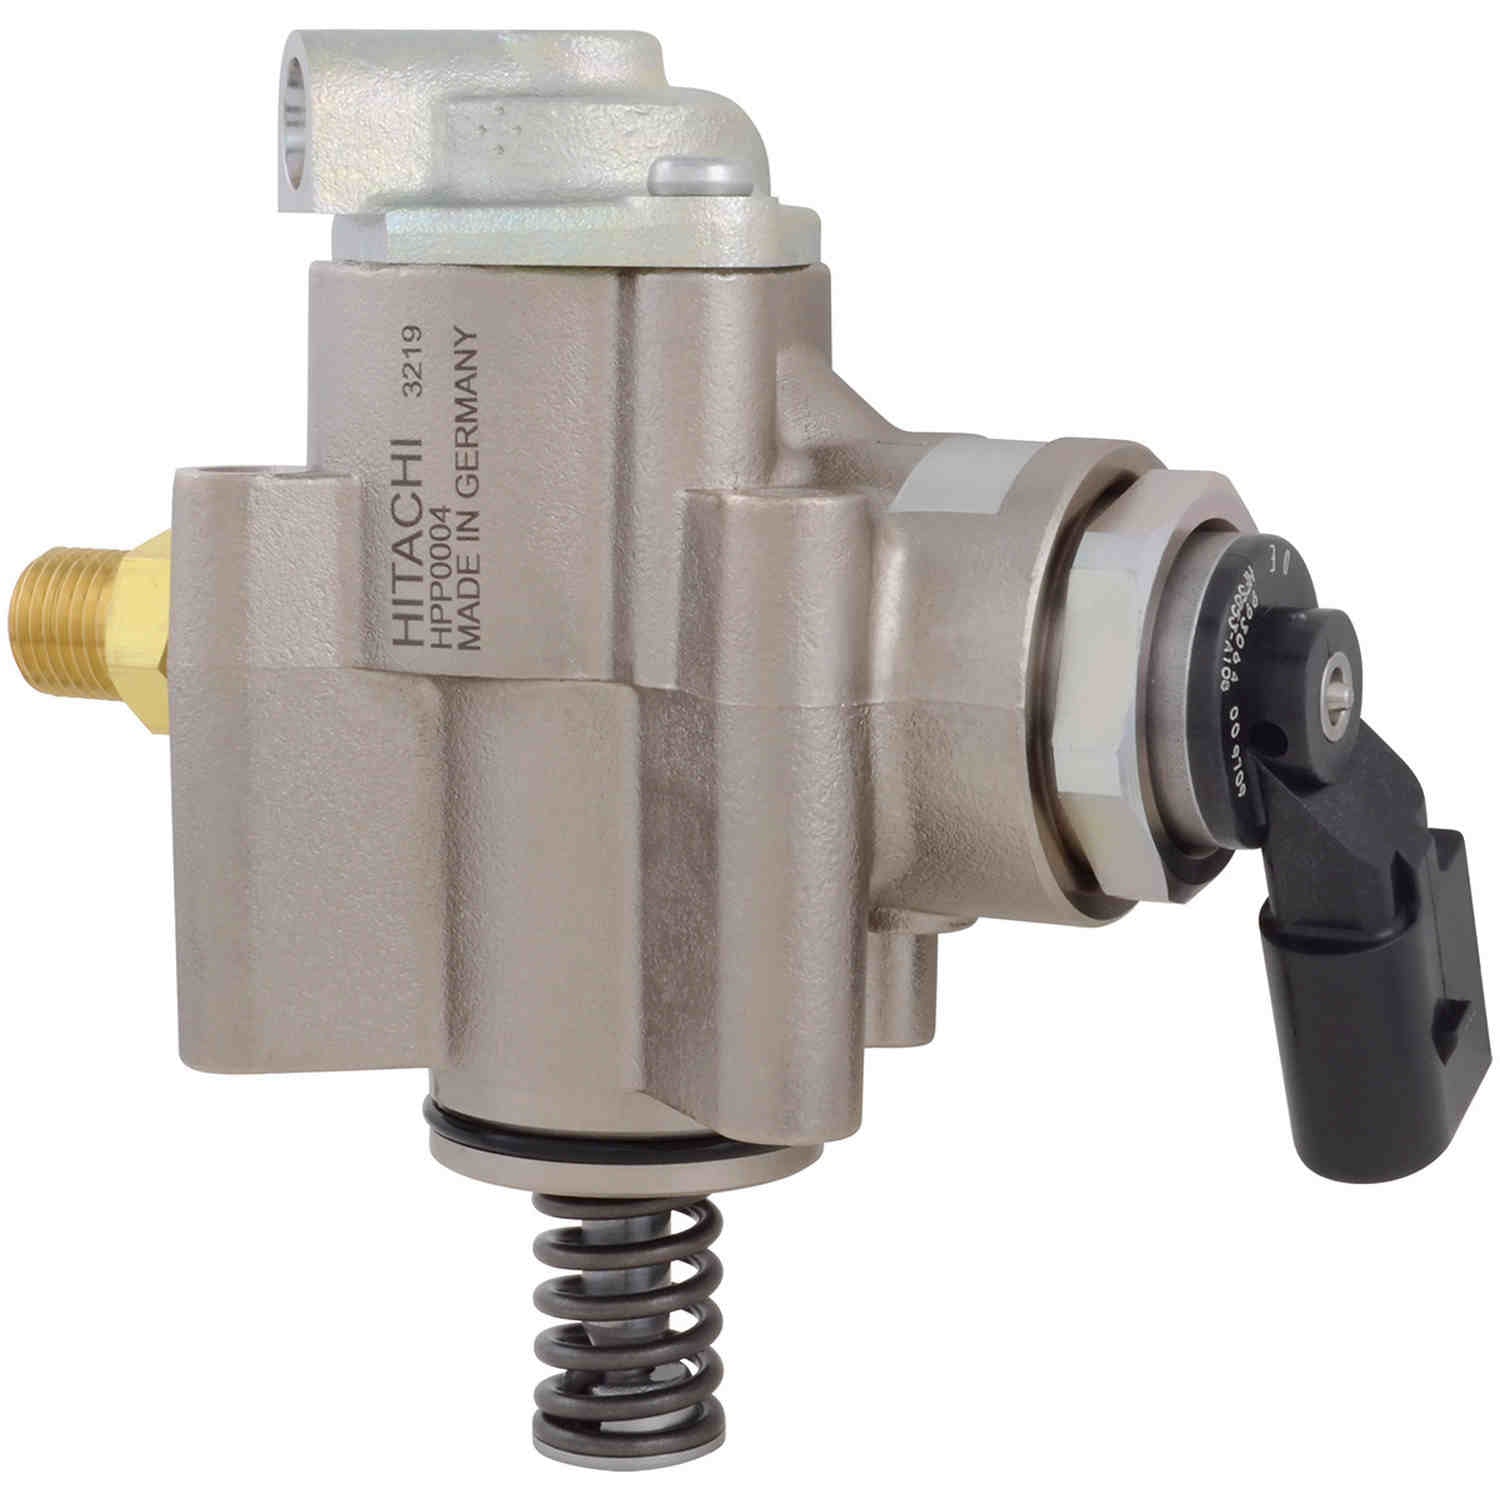 Left View of Direct Injection High Pressure Fuel Pump HITACHI HPP0004